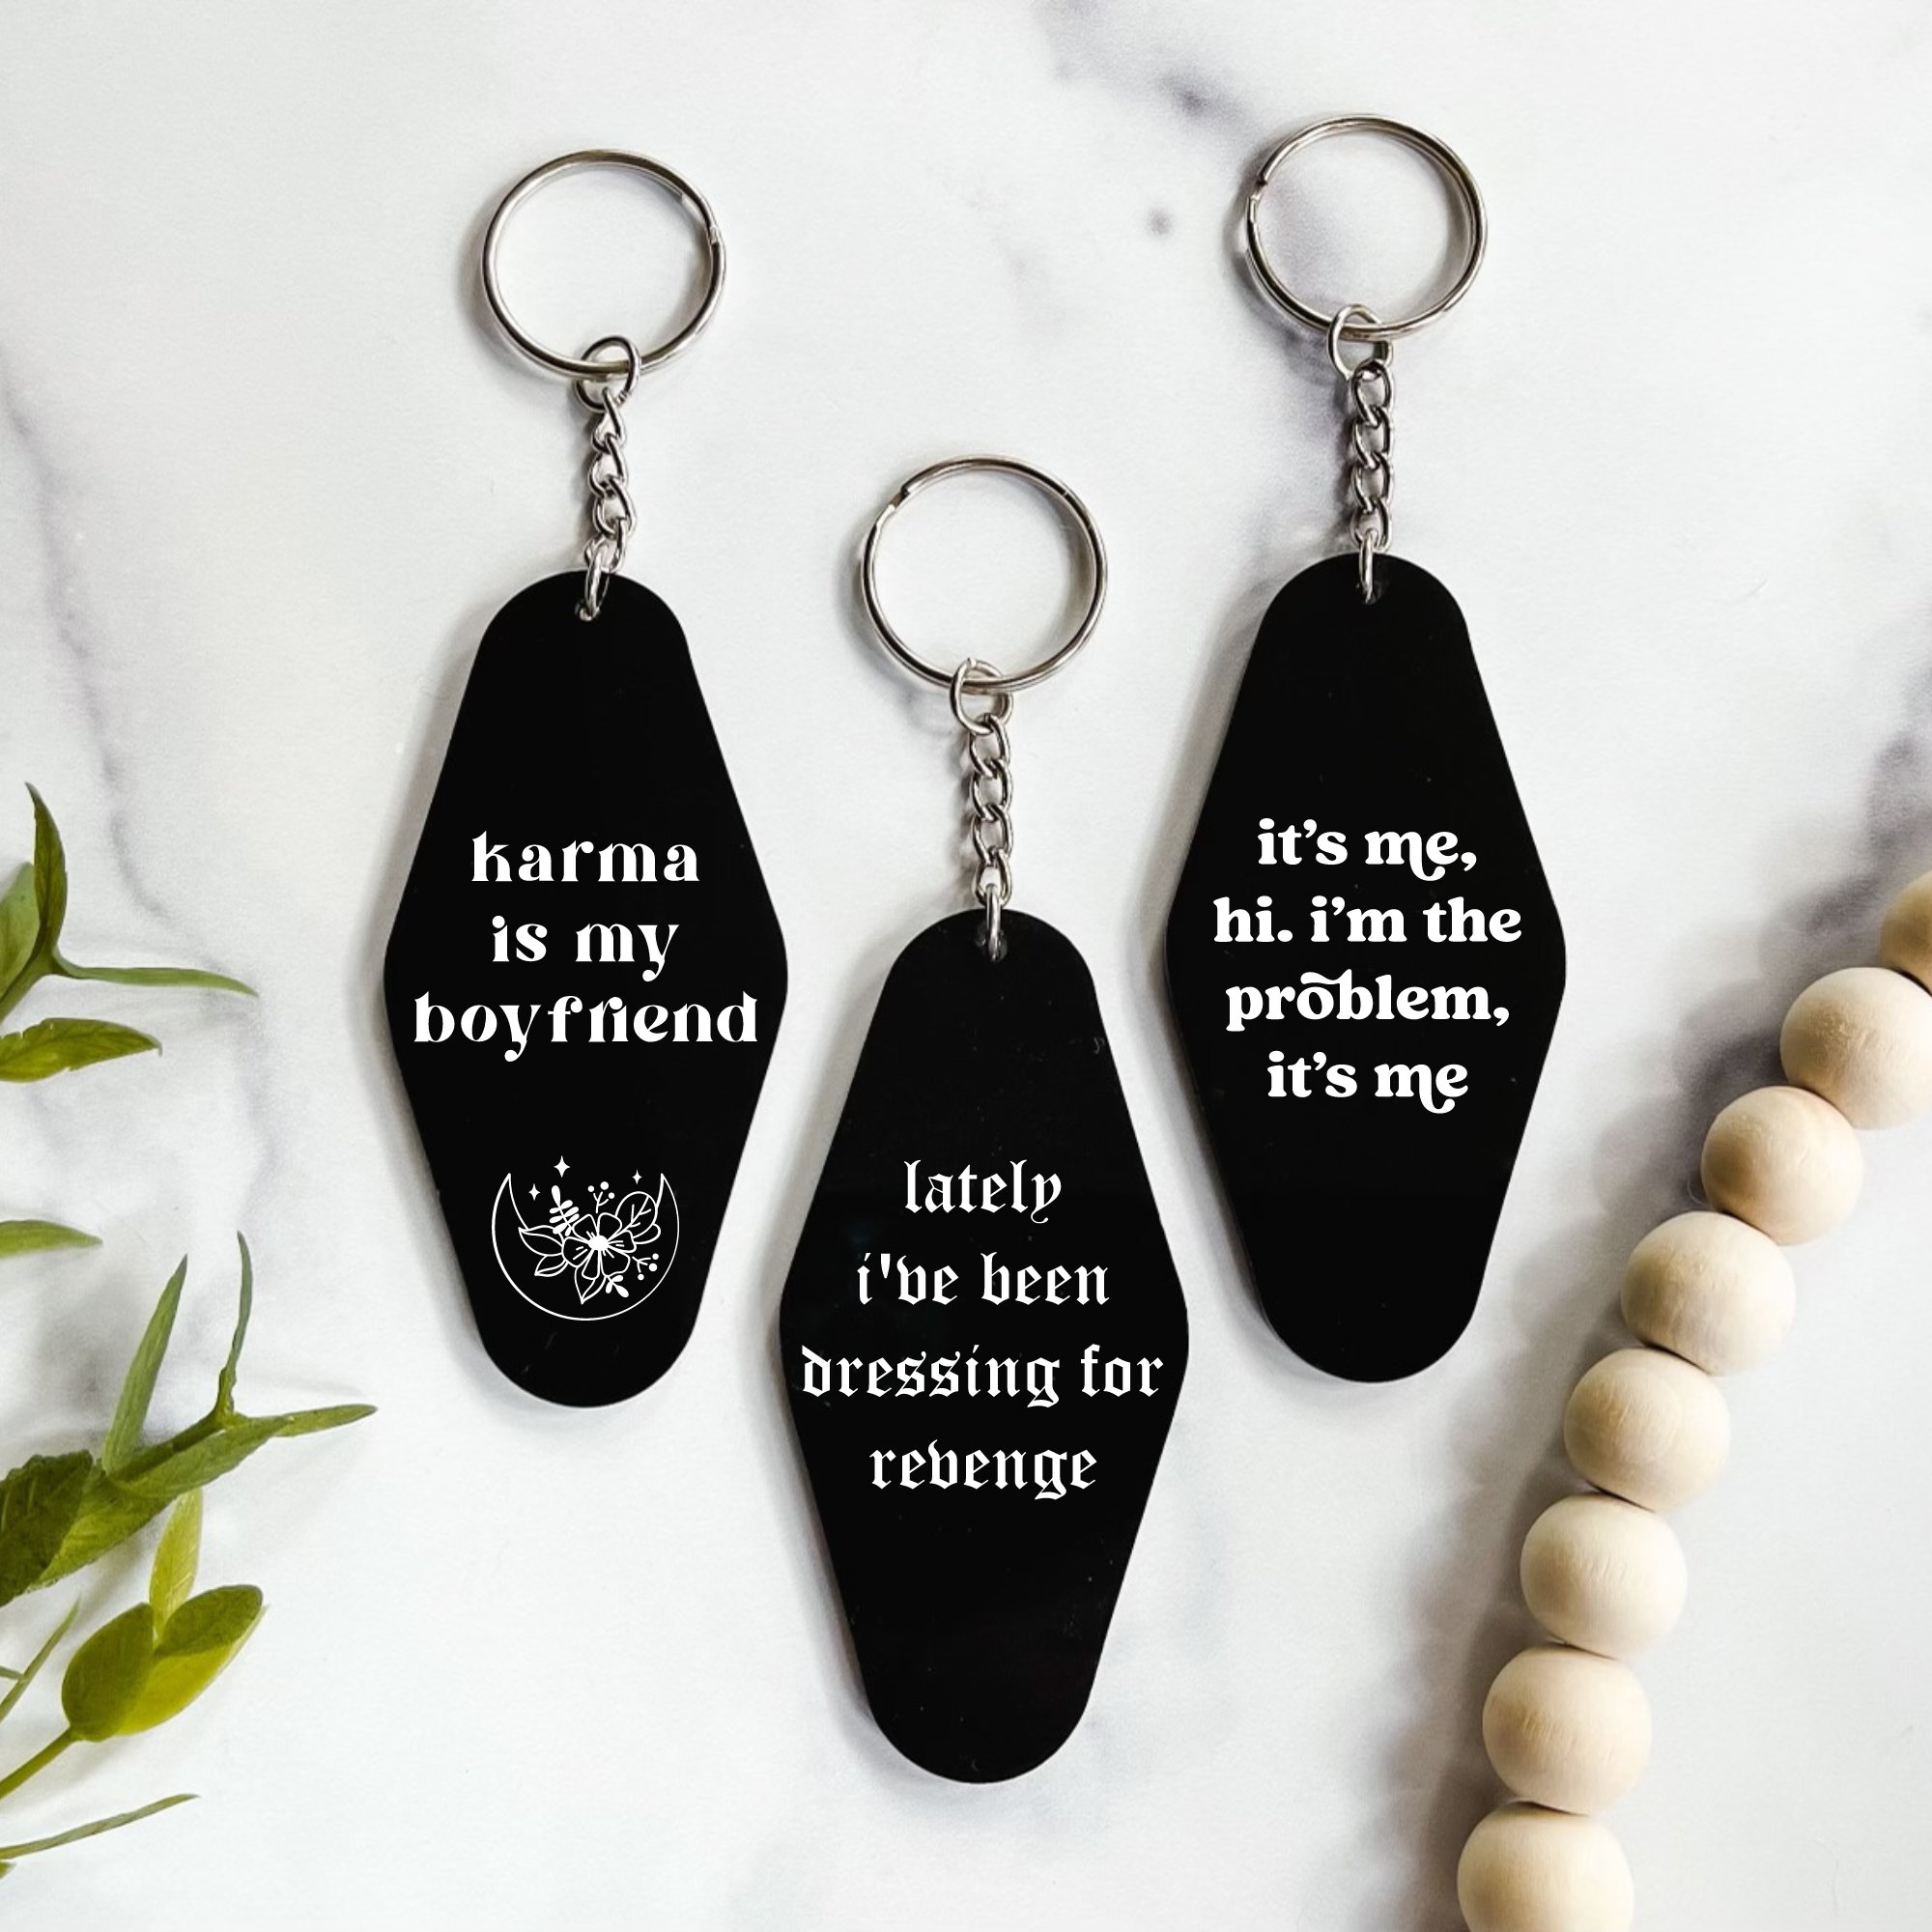 Taylor Swift Lover Keychains